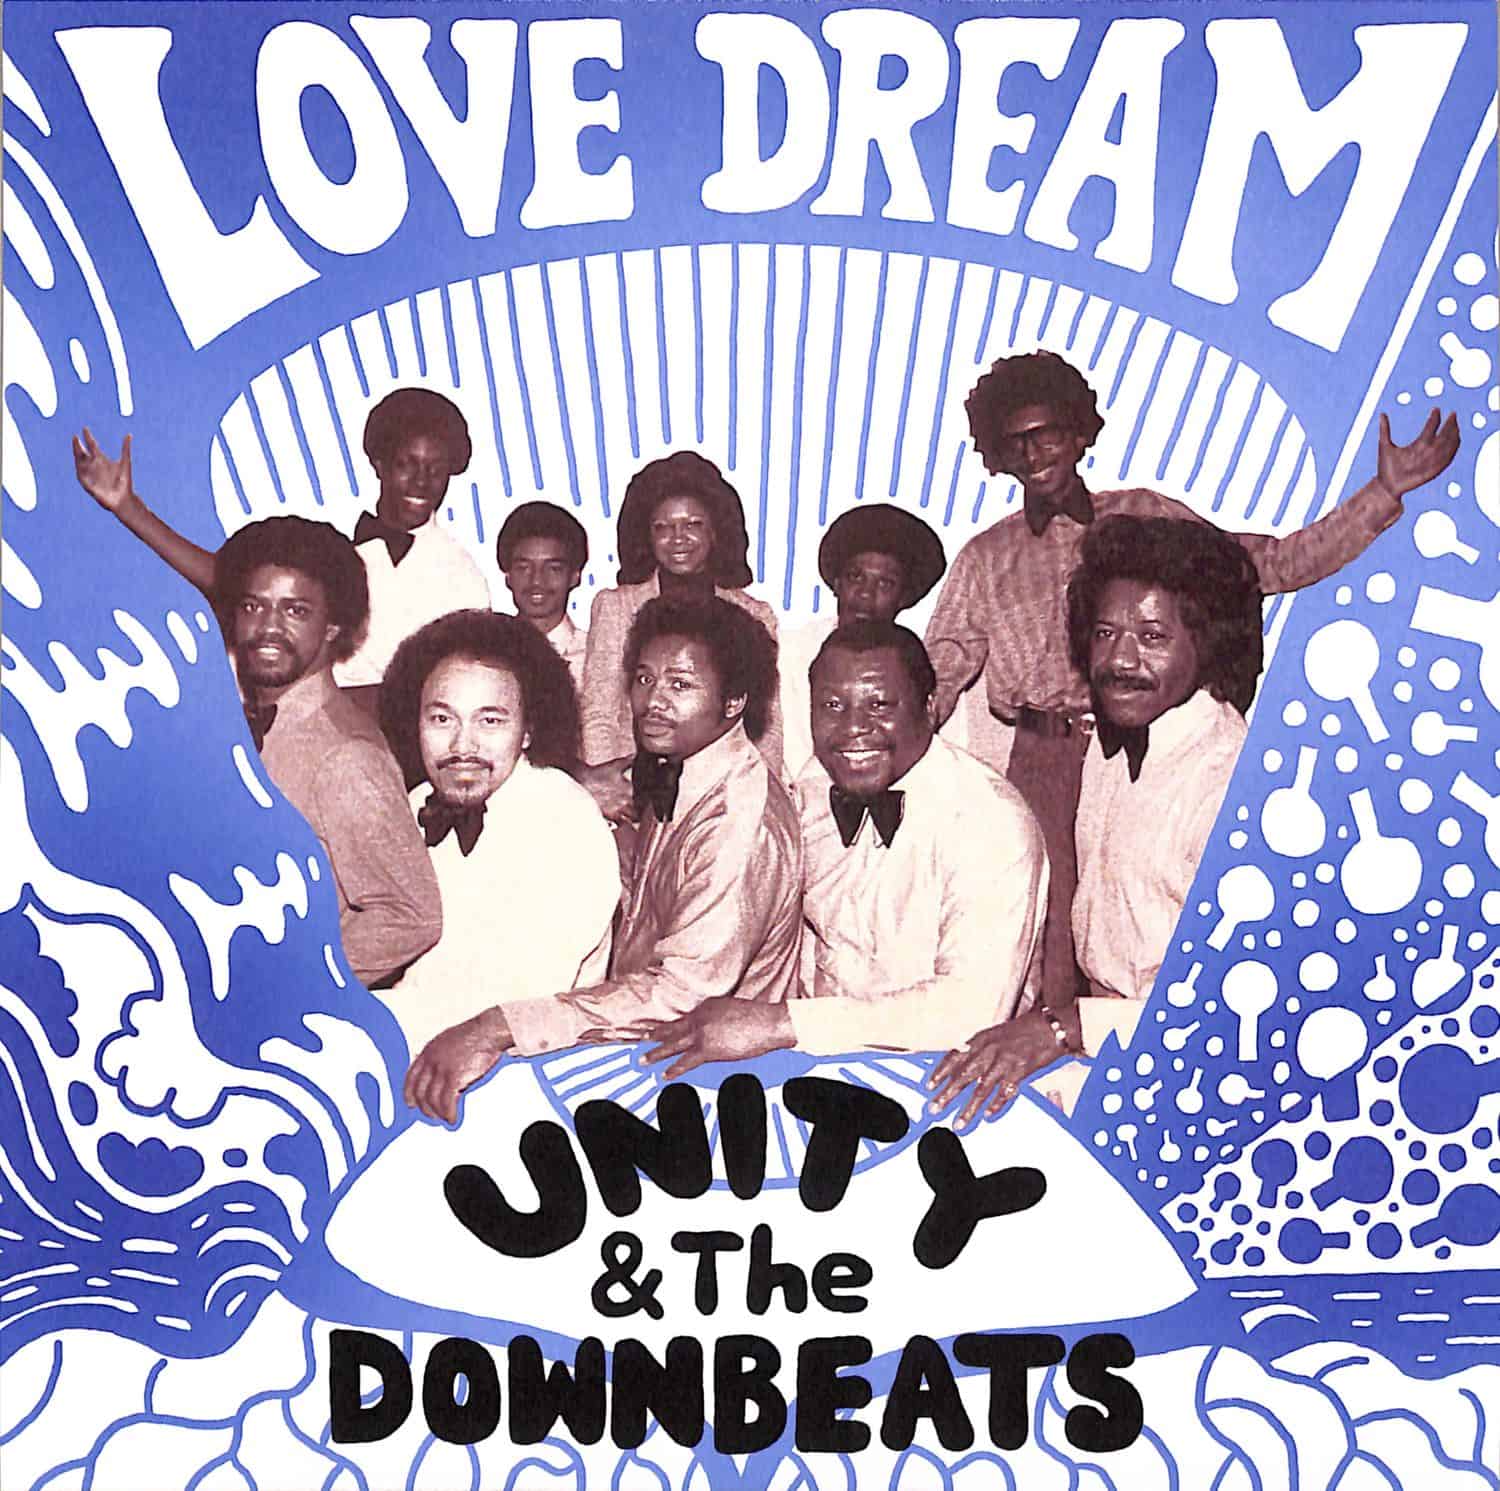 Unity & The Downbeats - LOVE DREAM / HIGH VOLTAGE 